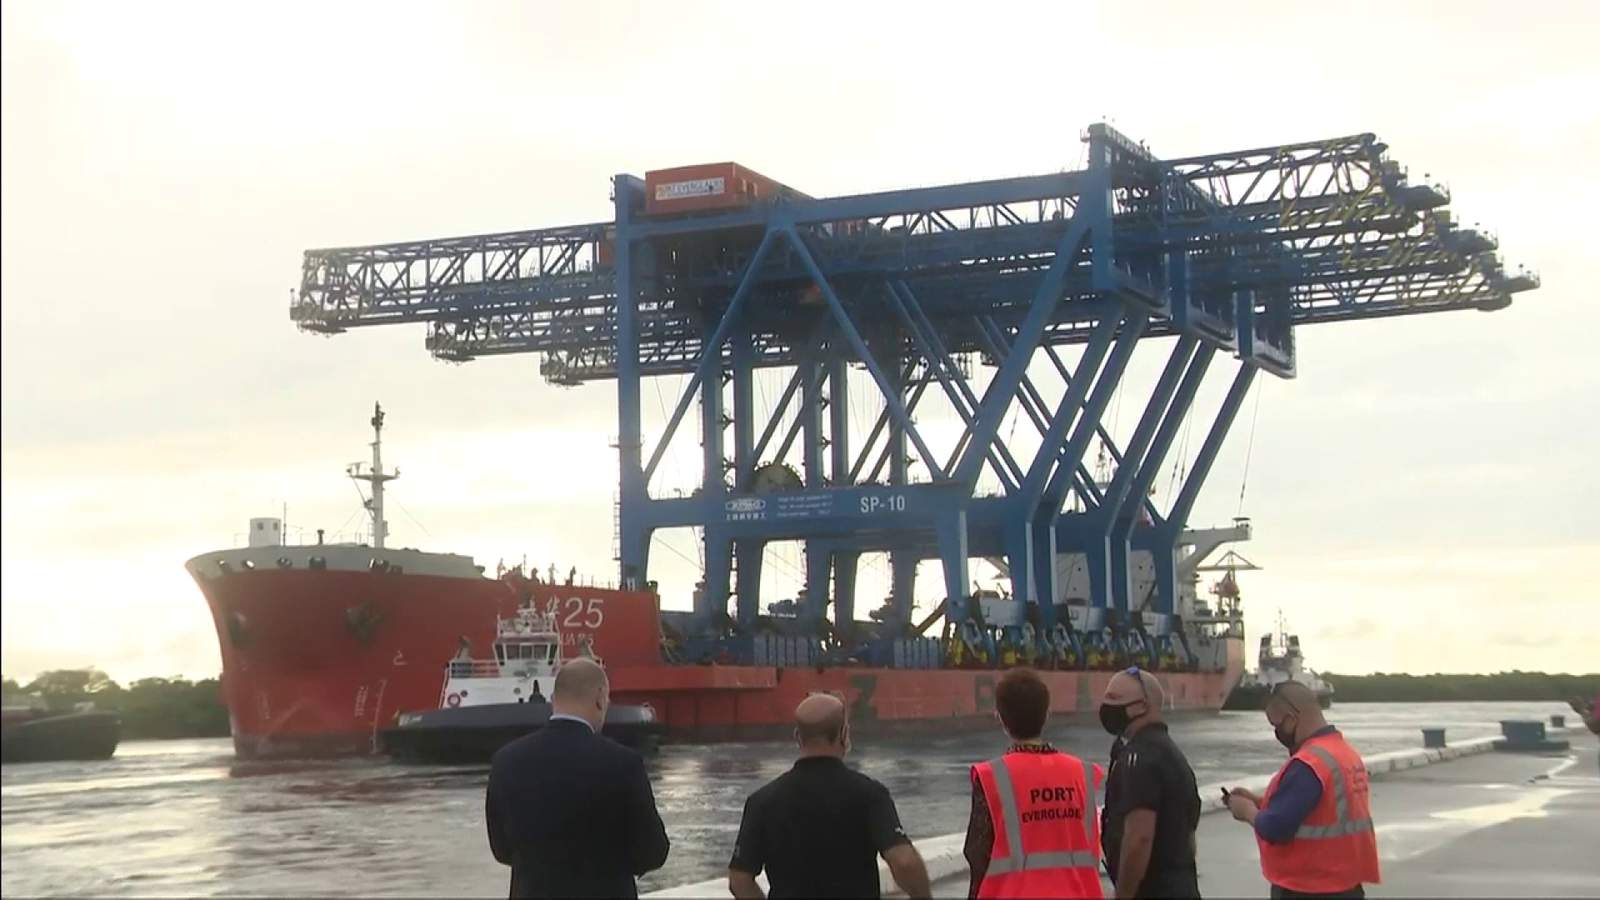 Huge ‘next generation’ cranes from China arrive at Port Everglades for expansion project